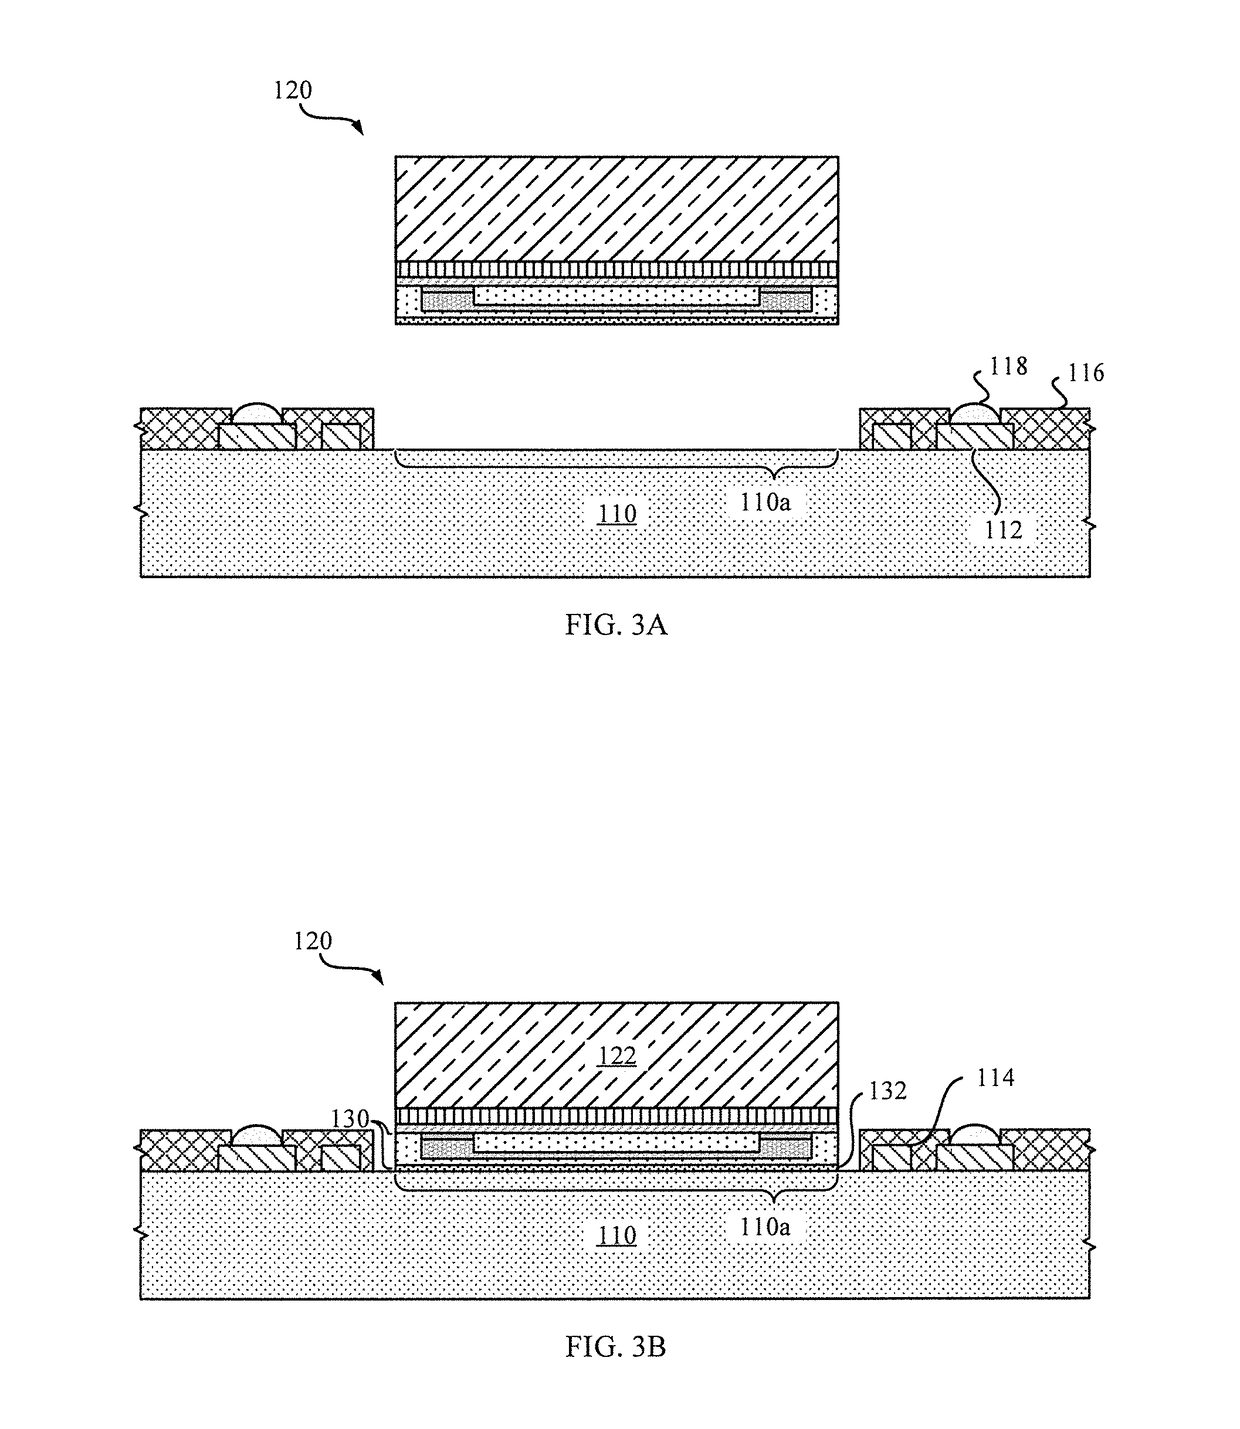 High-density interconnecting adhesive tape